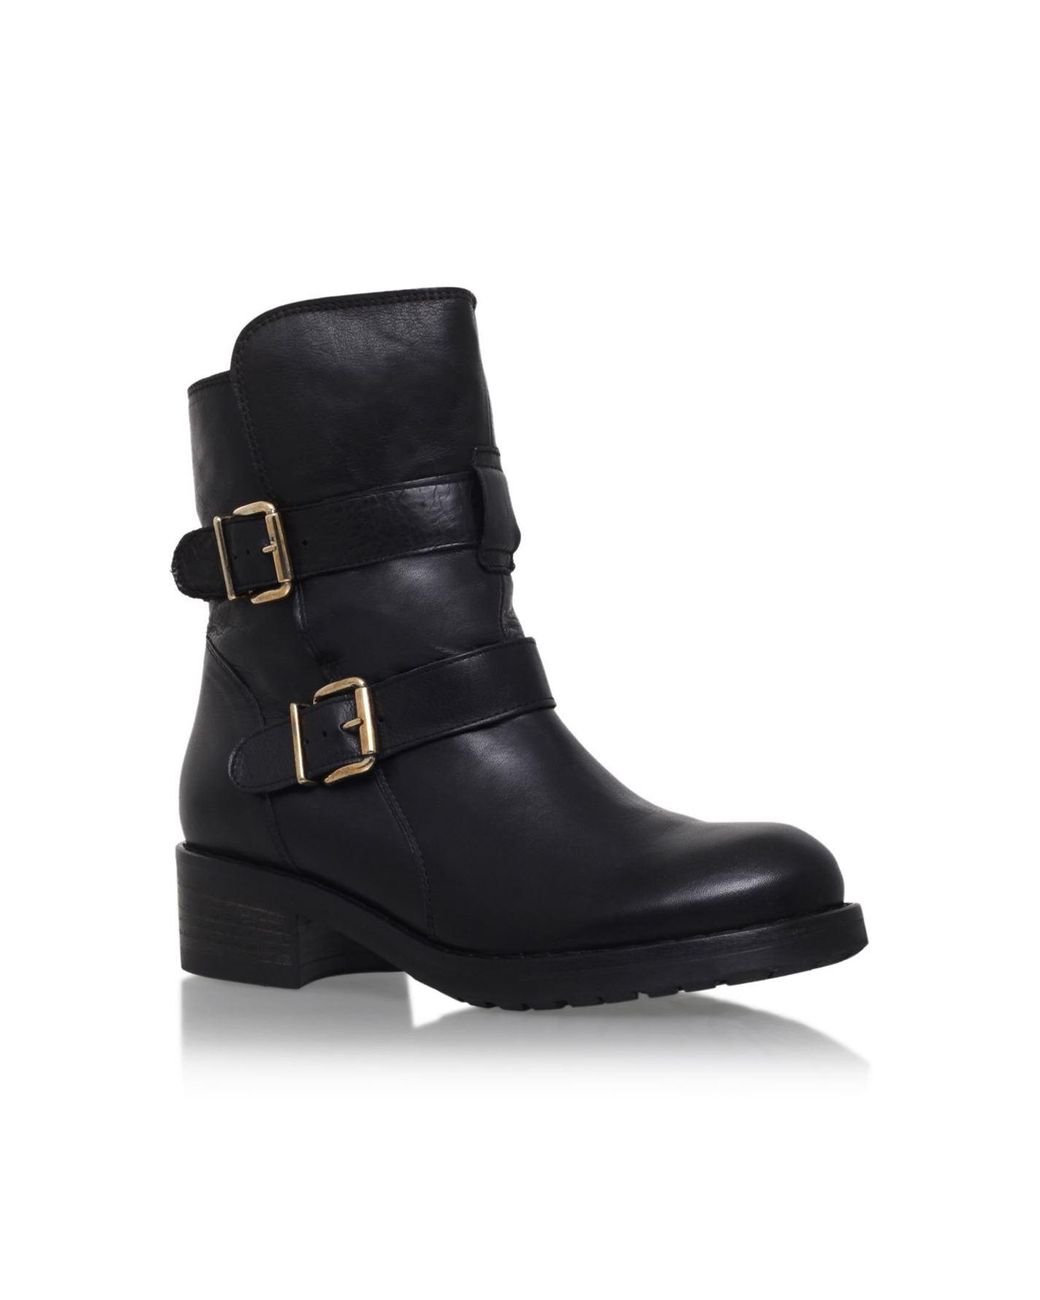 Kurt Geiger Leather Richmond Buckle Calf High Boots in Black Leather ...